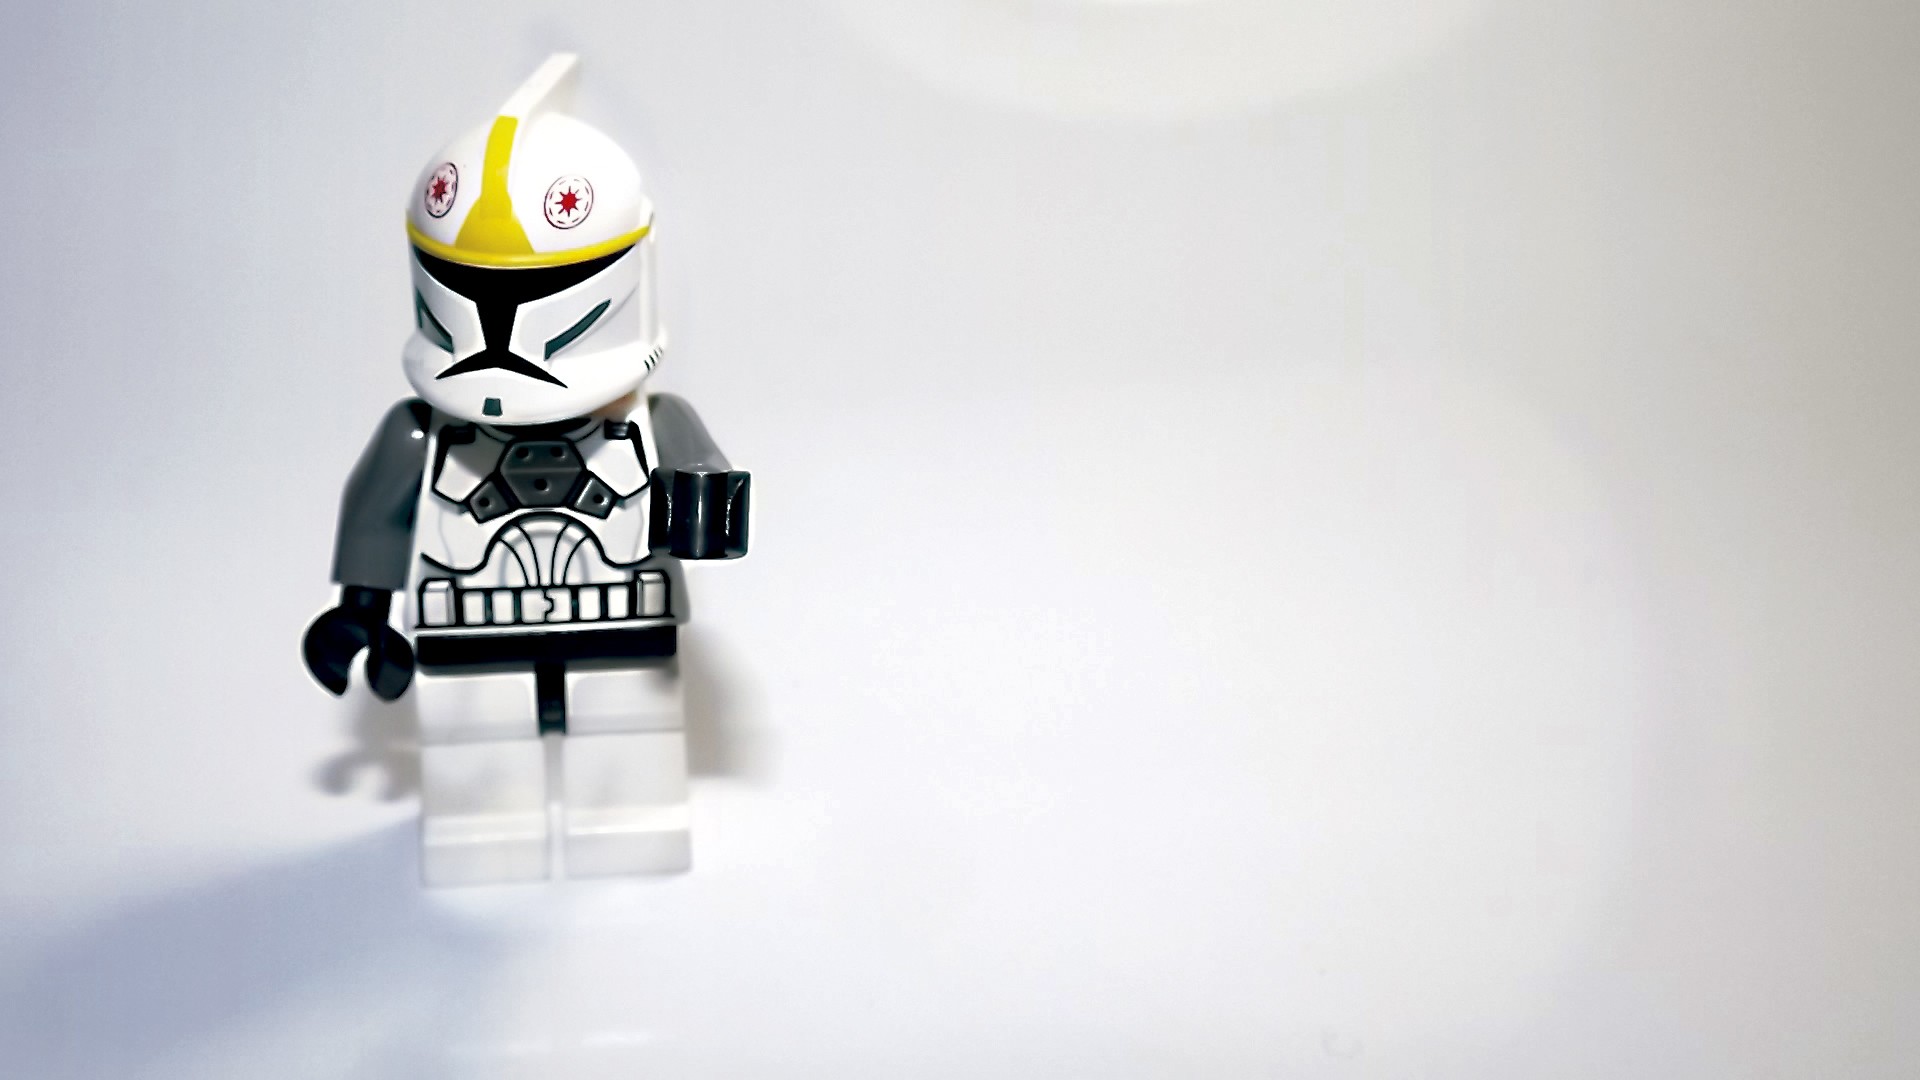 General 1920x1080 Star Wars LEGO Star Wars simple background toys macro clone trooper pilot LEGO white background figurines gradient movie characters